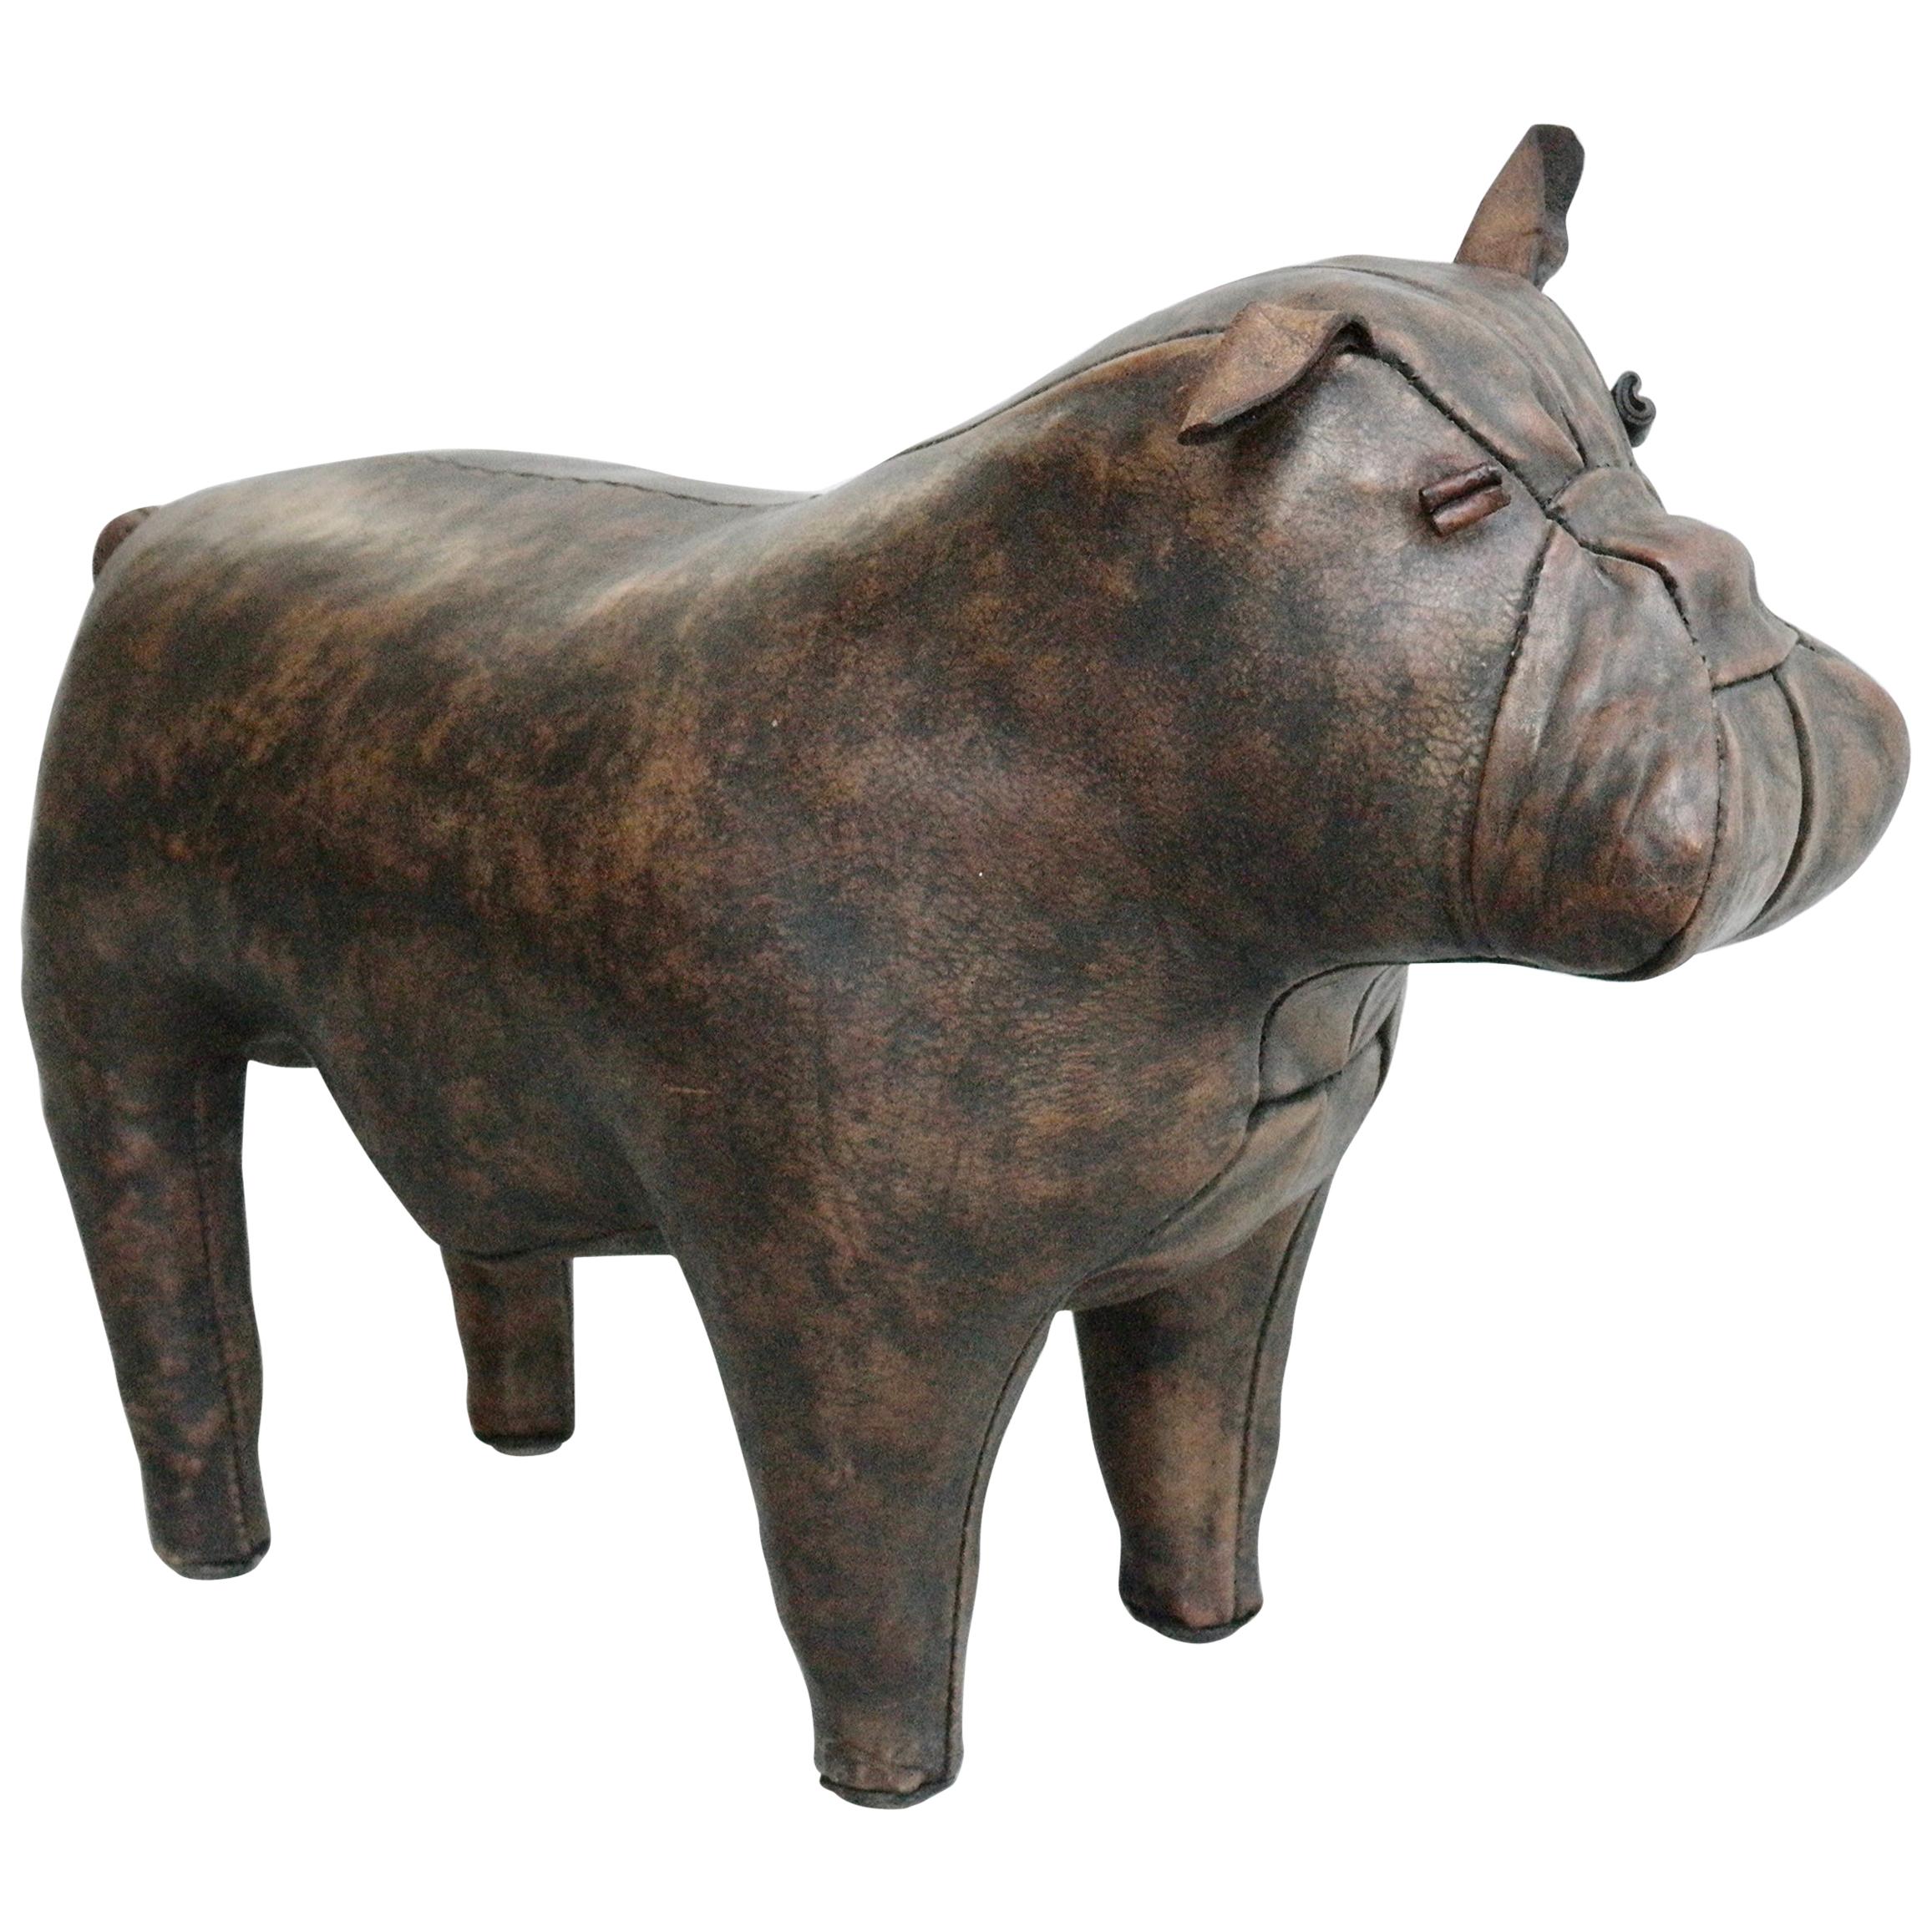 Leather Bulldog footstool by Dimitri Omersa for Abercrombie & Fitch